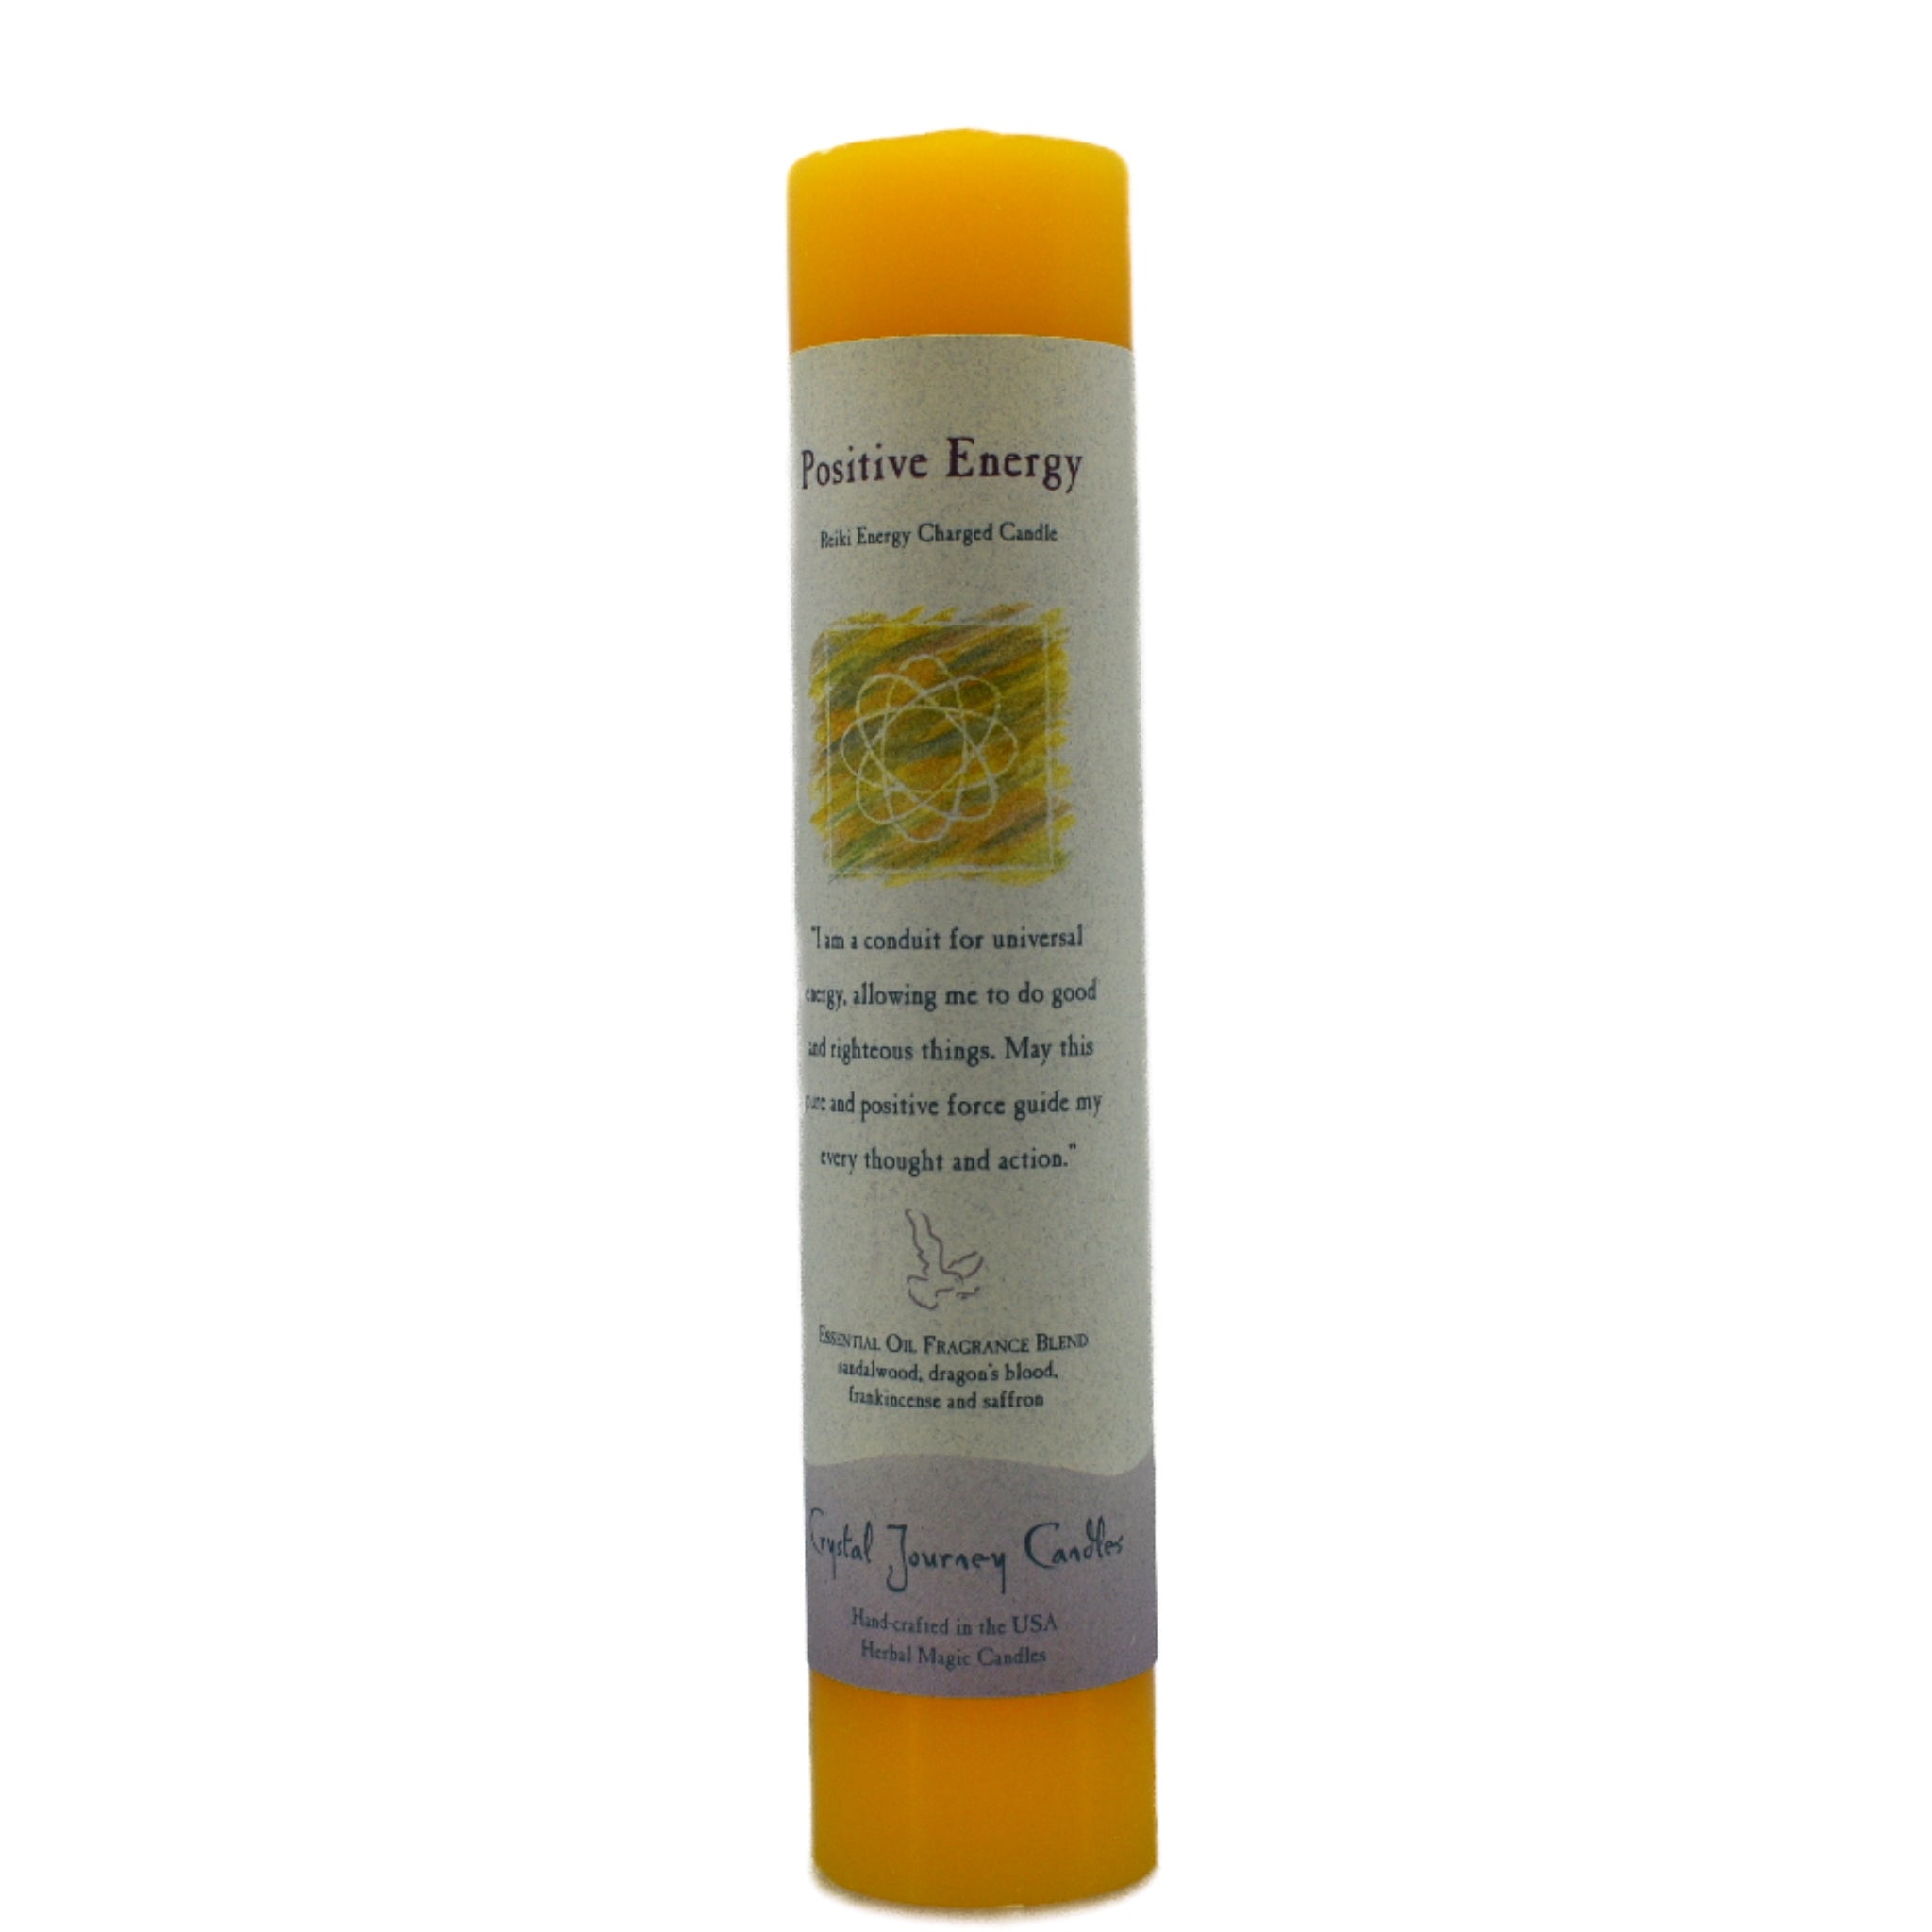 Positive Energy Pillar Candle.  This candle is scented with Frankincense, Dragon's Blood. Sandalwood and Saffron essential oils.  Use this candle to attract positive energy to you.  